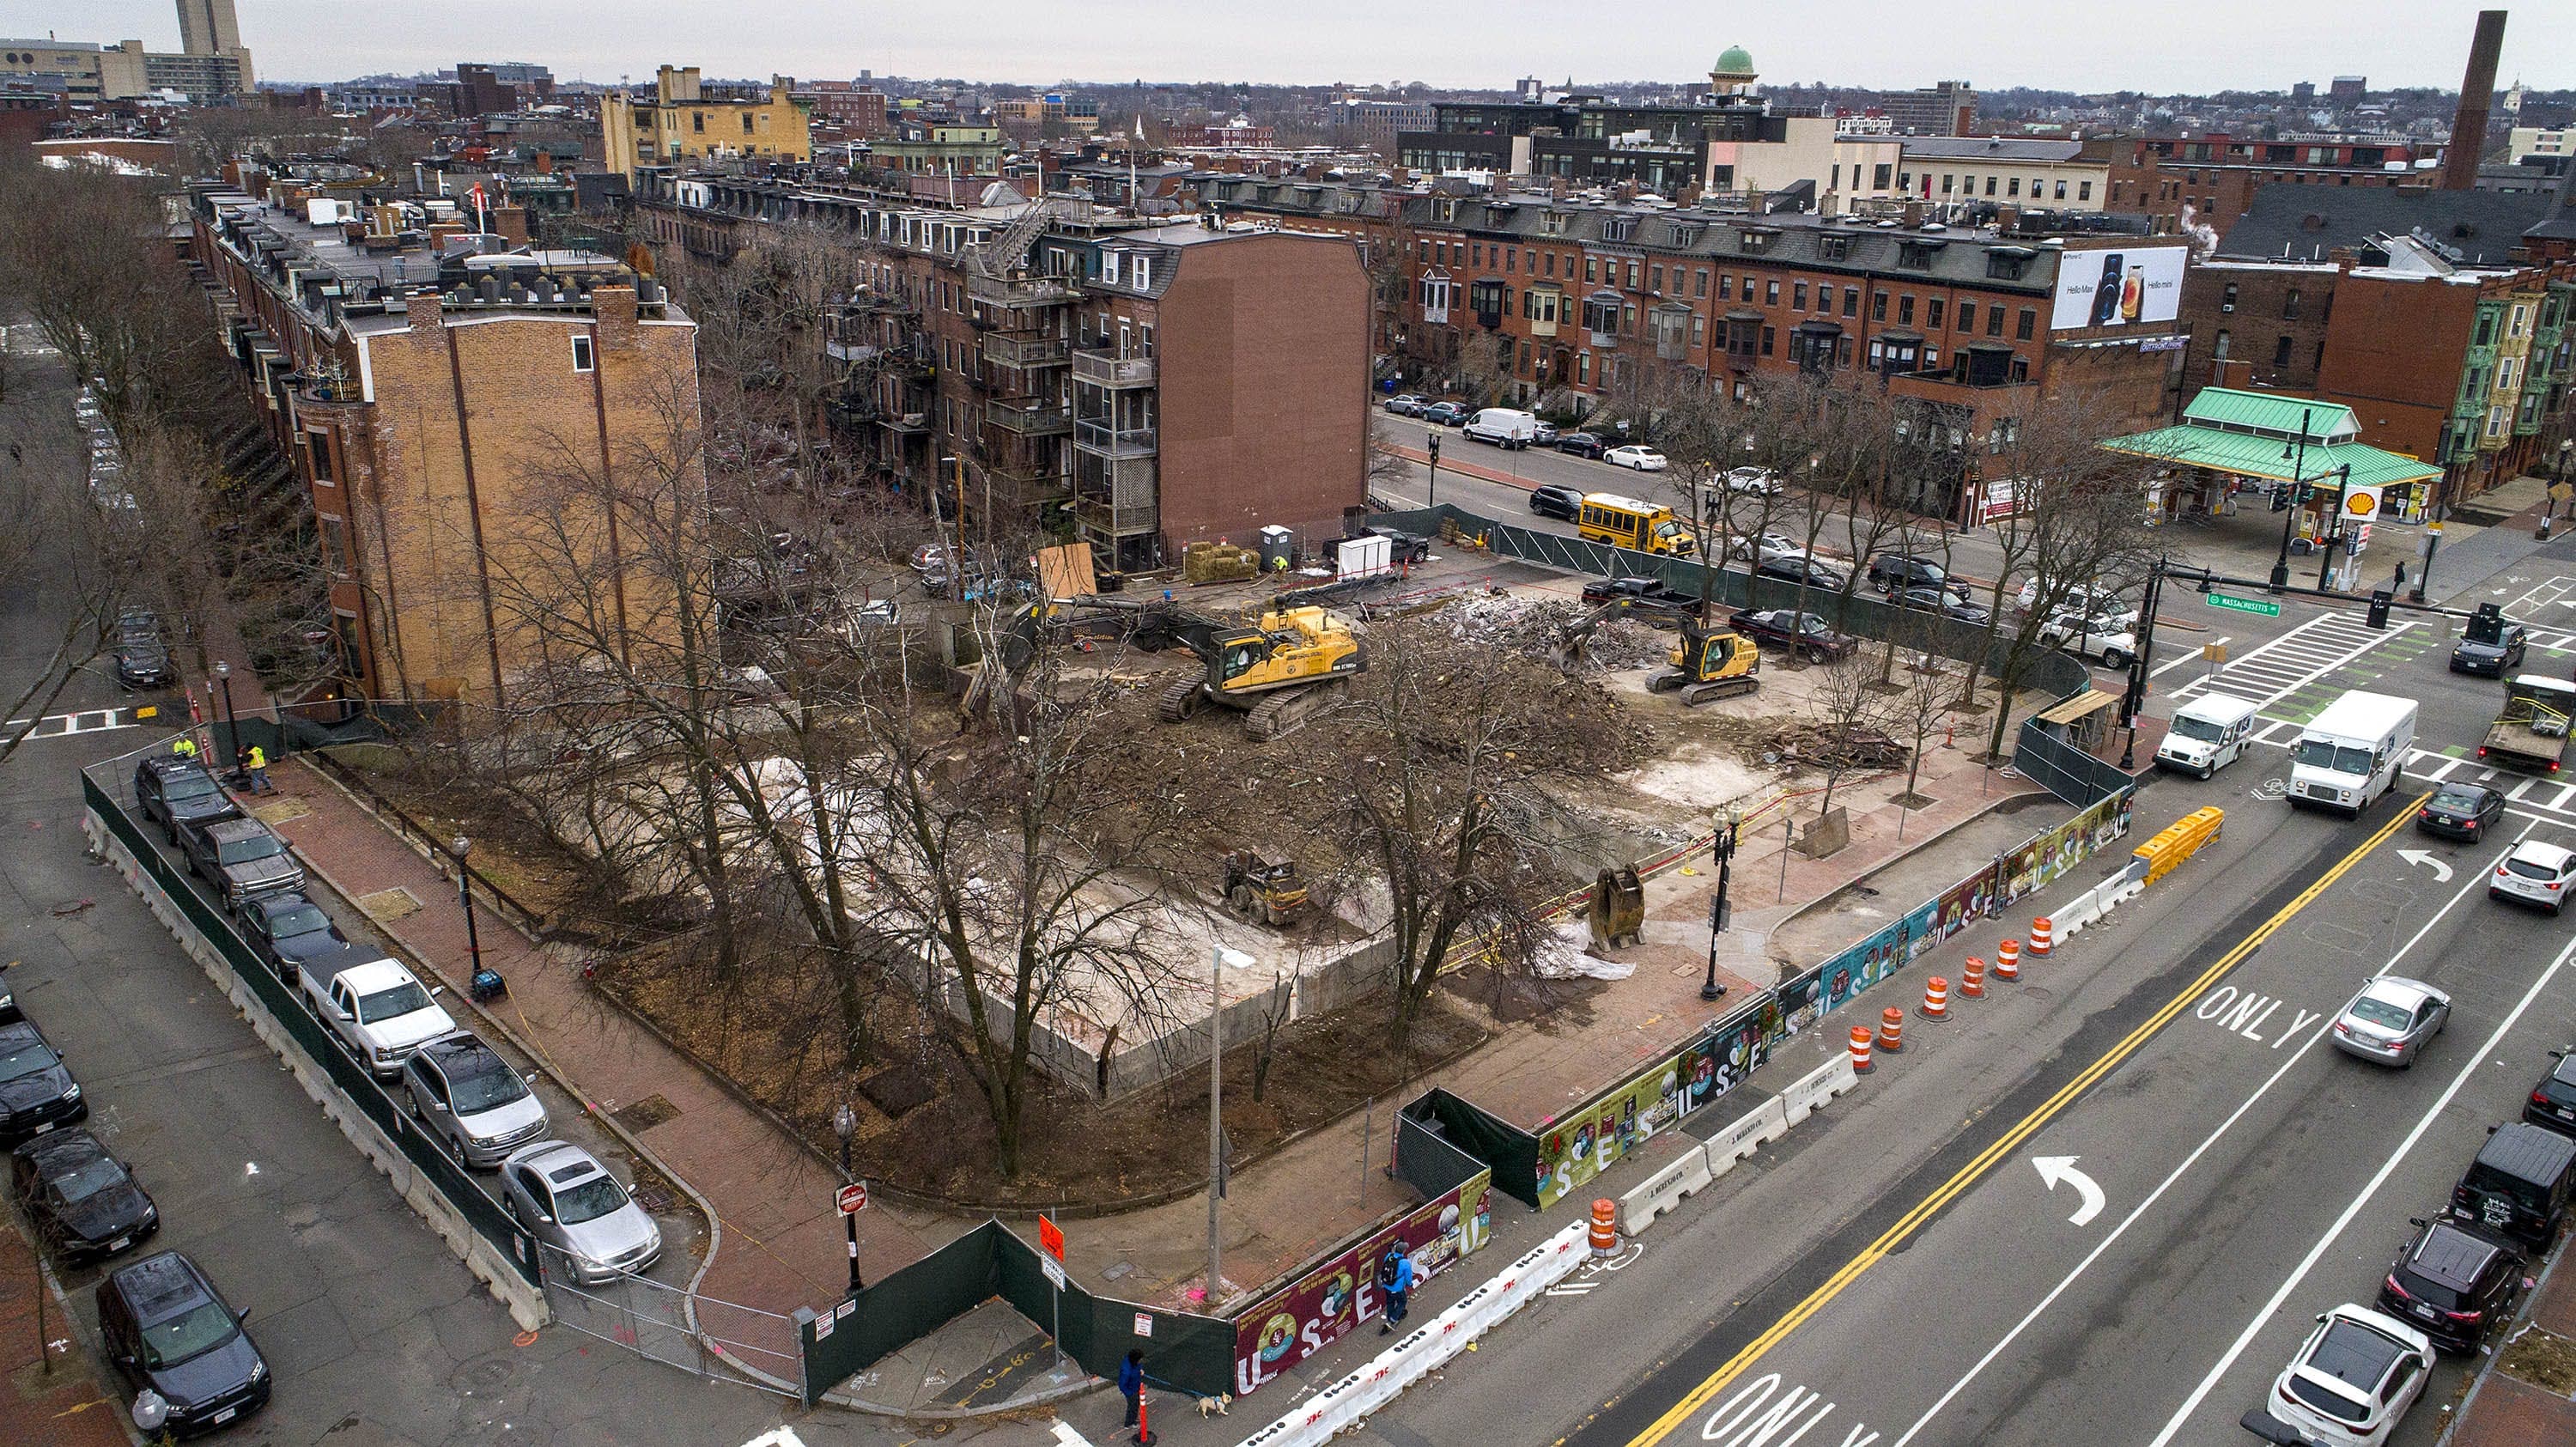 The site of the Harriet Tubman House at 566 Columbus Avenue, which is now under development. (Robin Lubbock/WBUR)